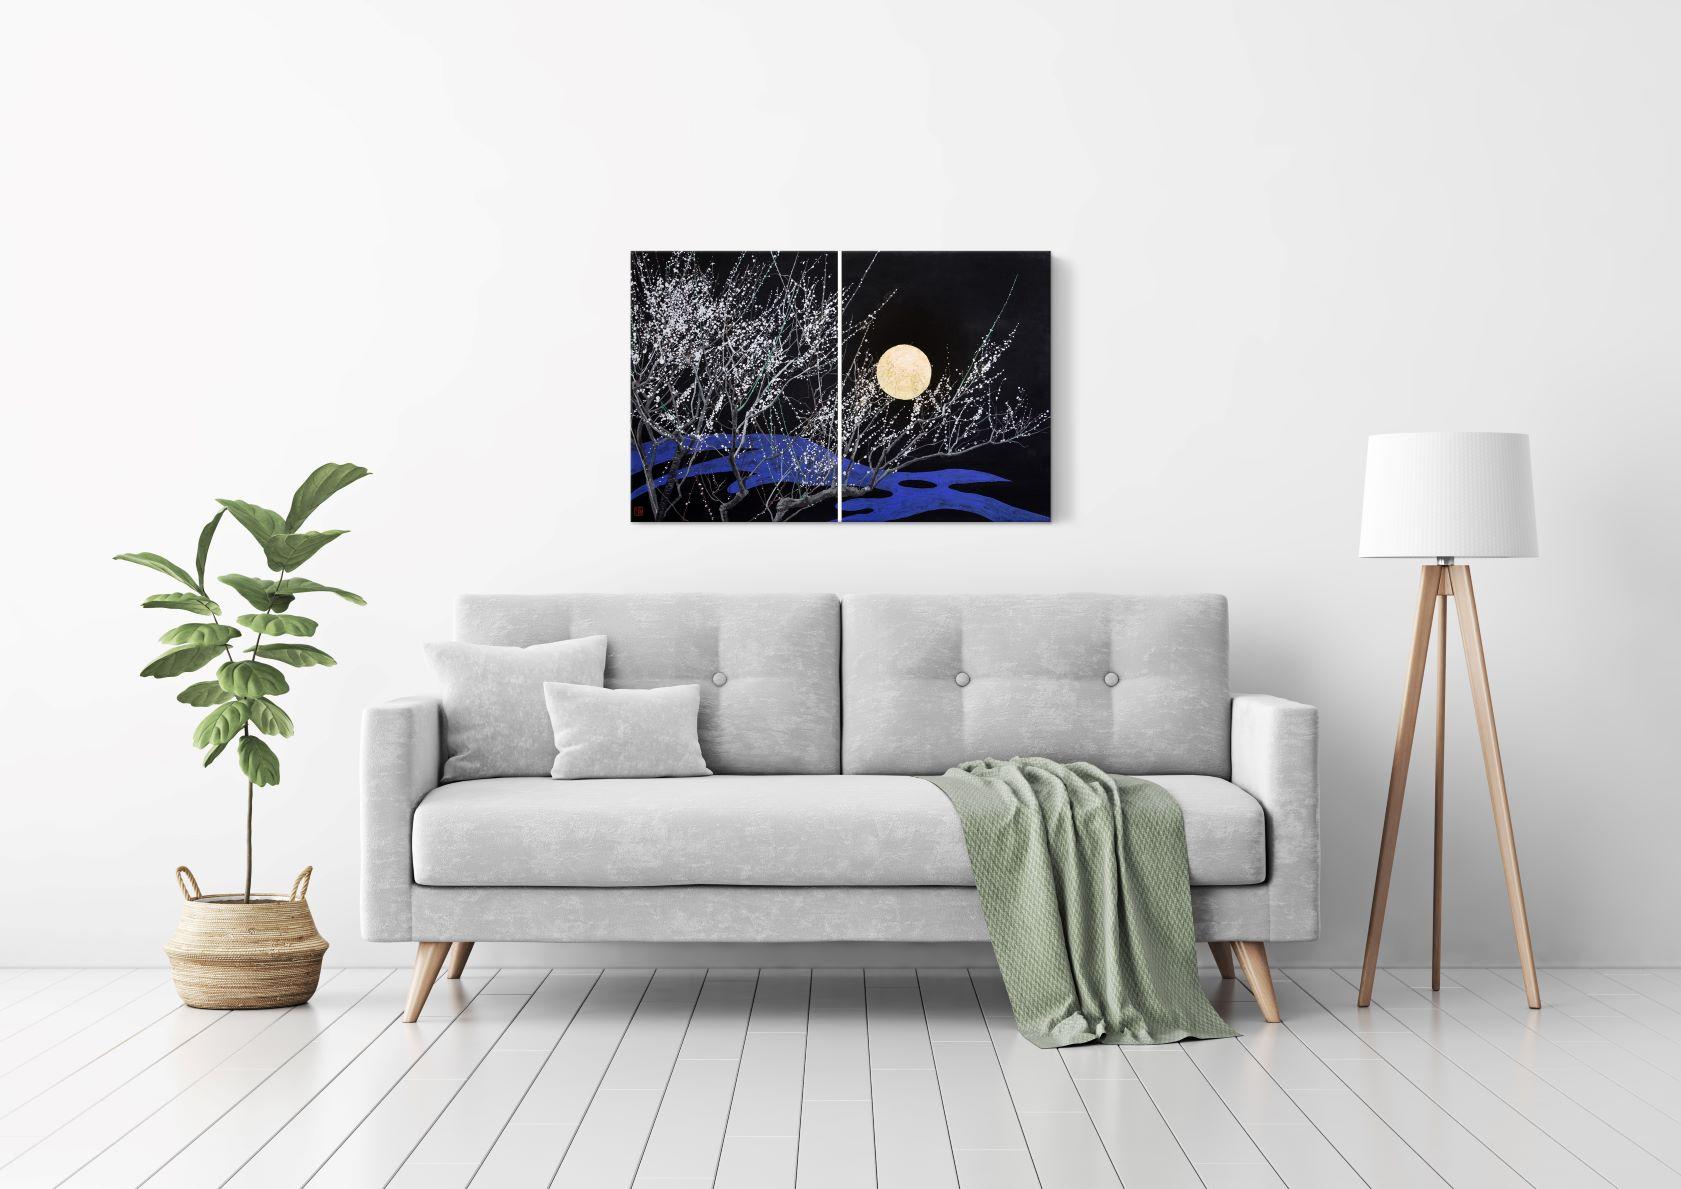 Nocturn IV by Lumi Mizutani - Japanese landscape painting, gold leaf, tree, moon For Sale 5